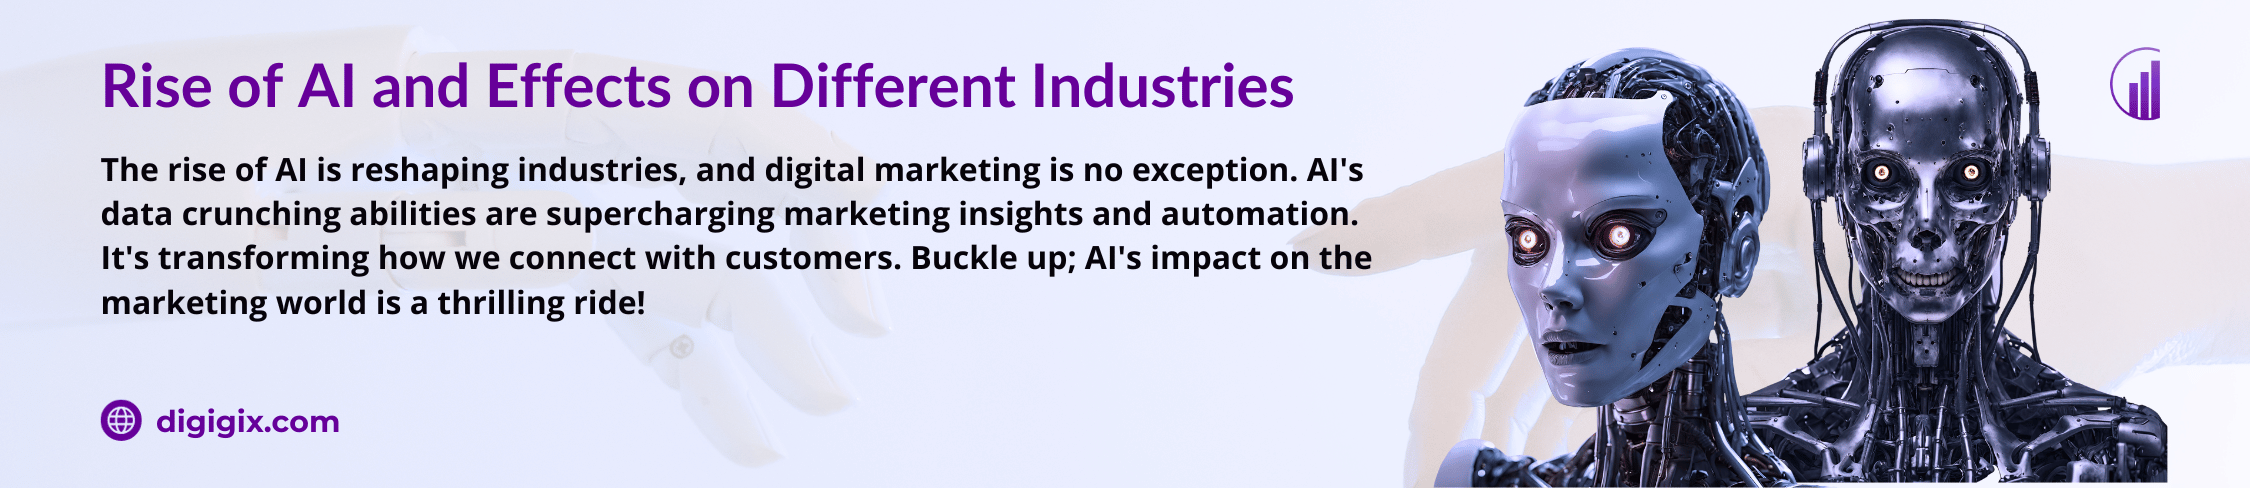 Rise of AI and Effects on Different Industries